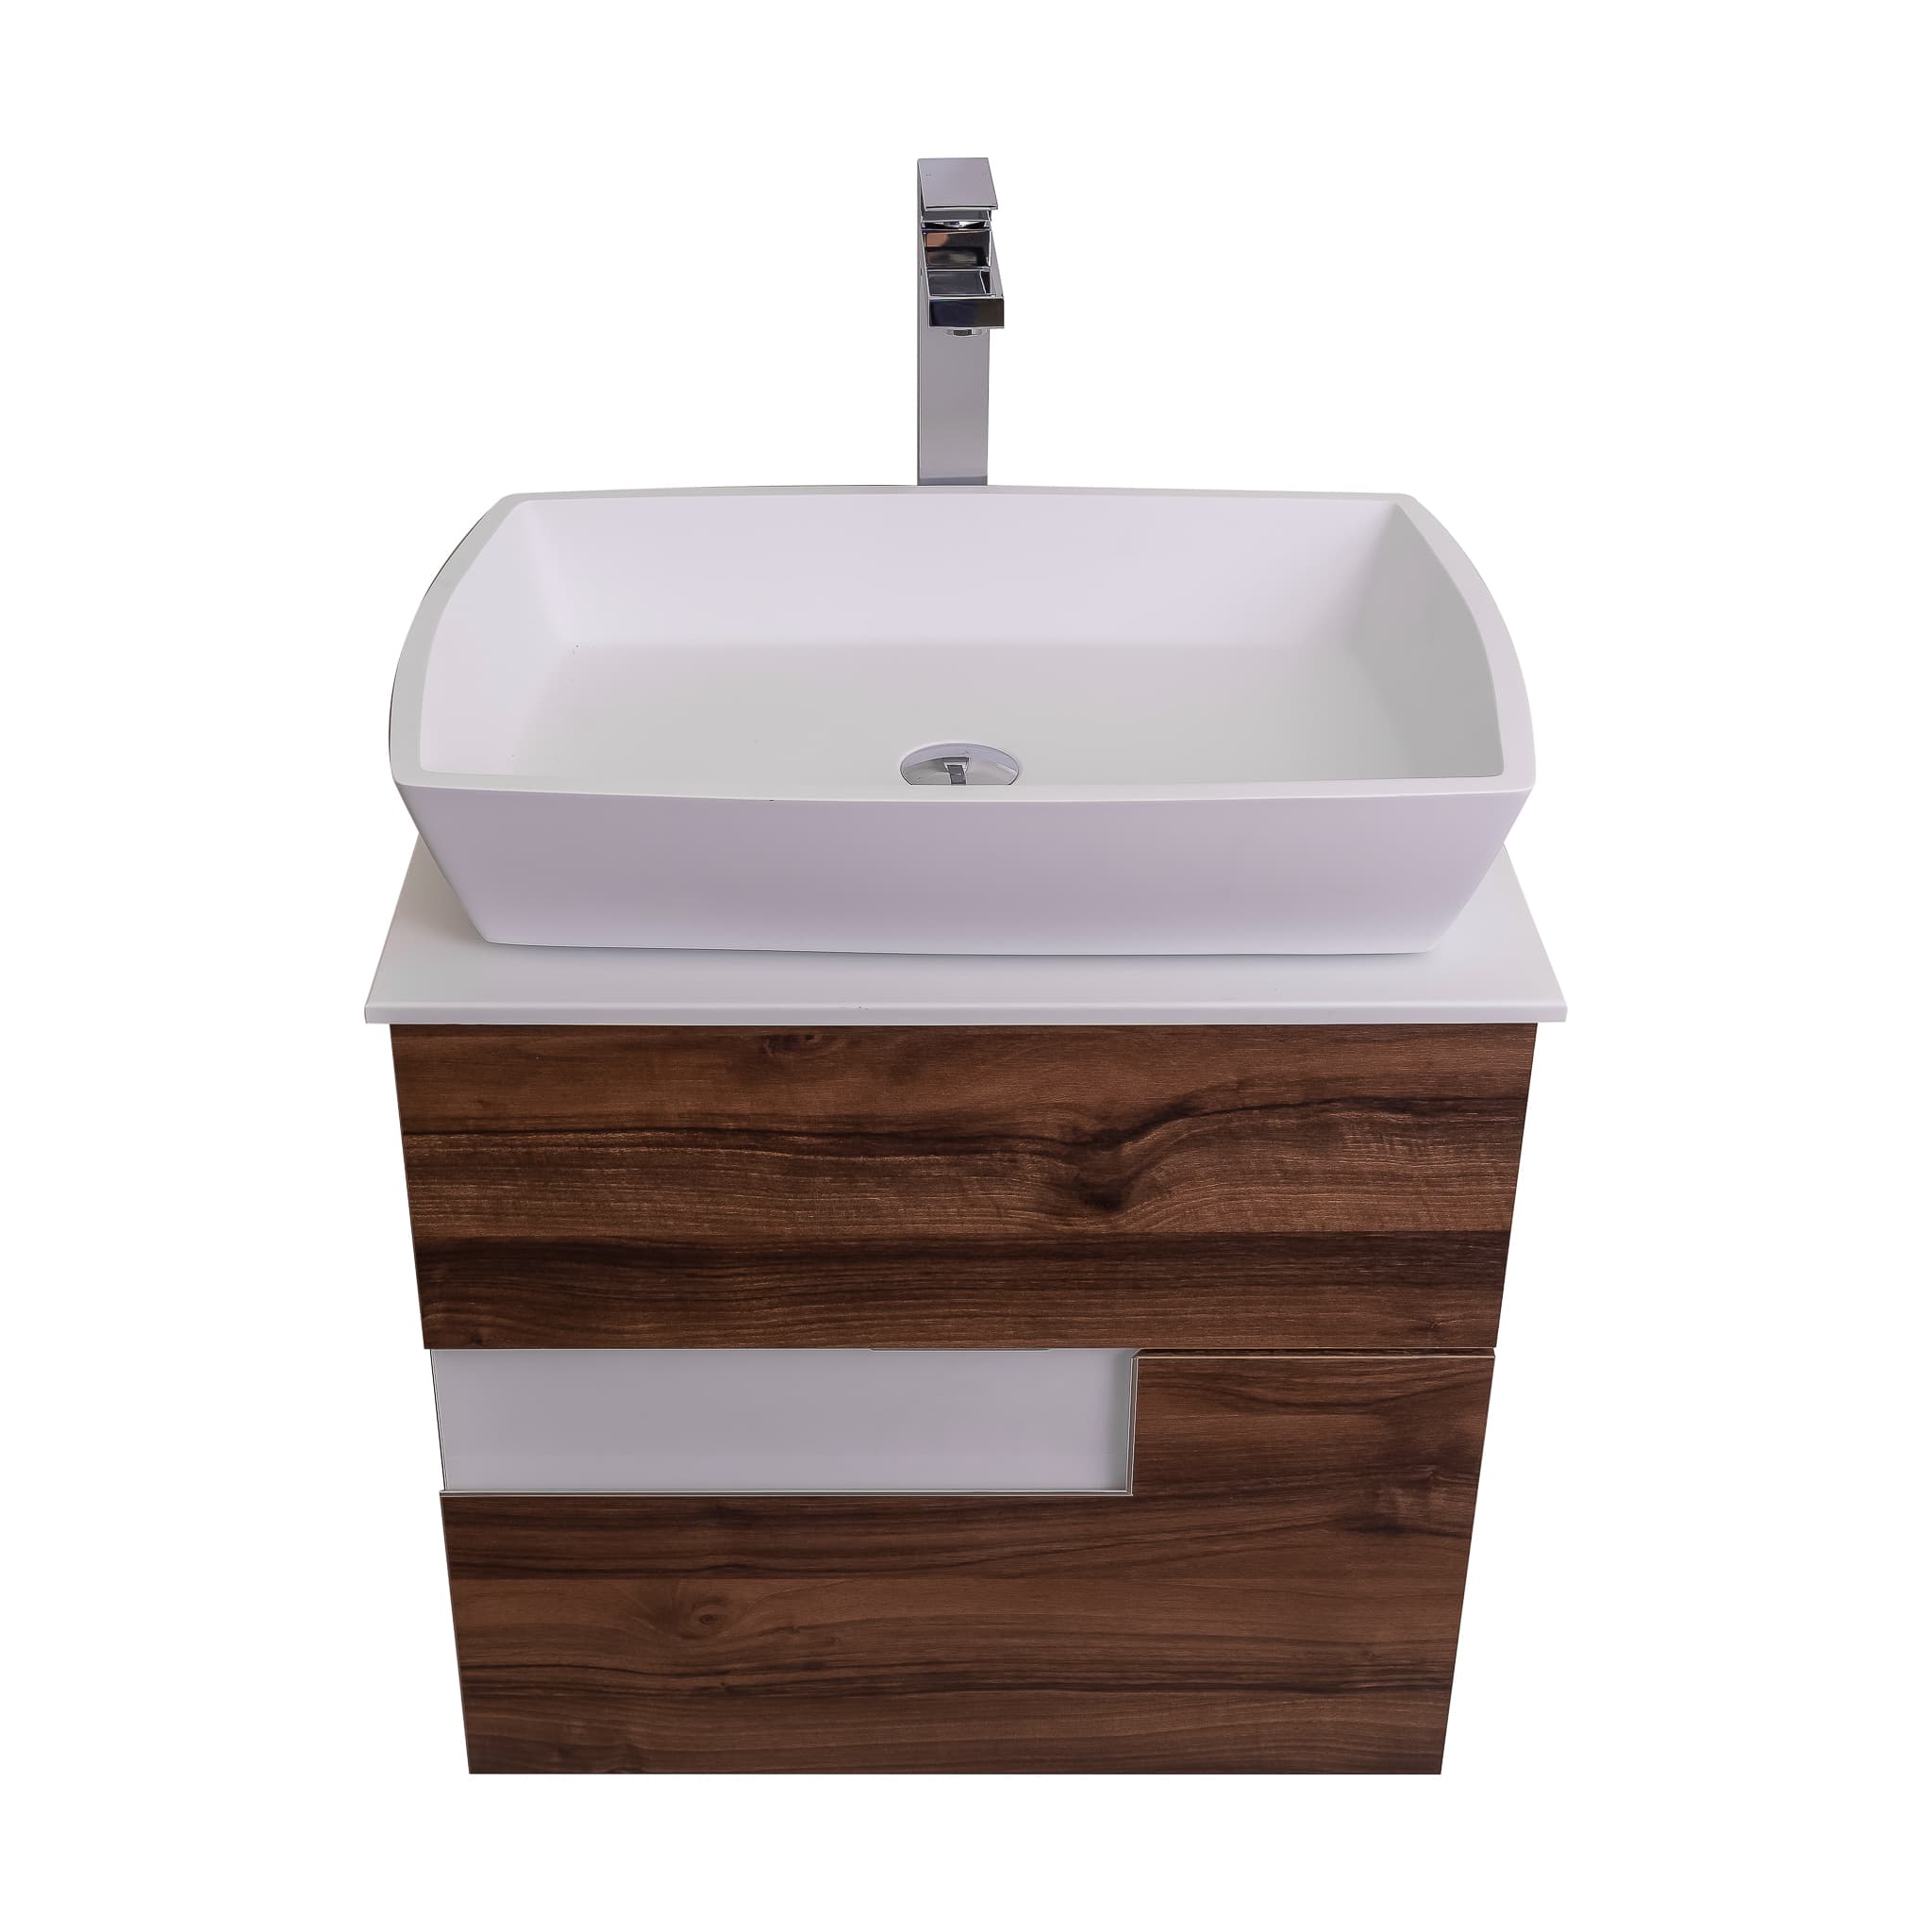 Vision 23.5 Valenti Medium Brown Wood Cabinet, Solid Surface Flat White Counter And Square Solid Surface White Basin 1316, Wall Mounted Modern Vanity Set